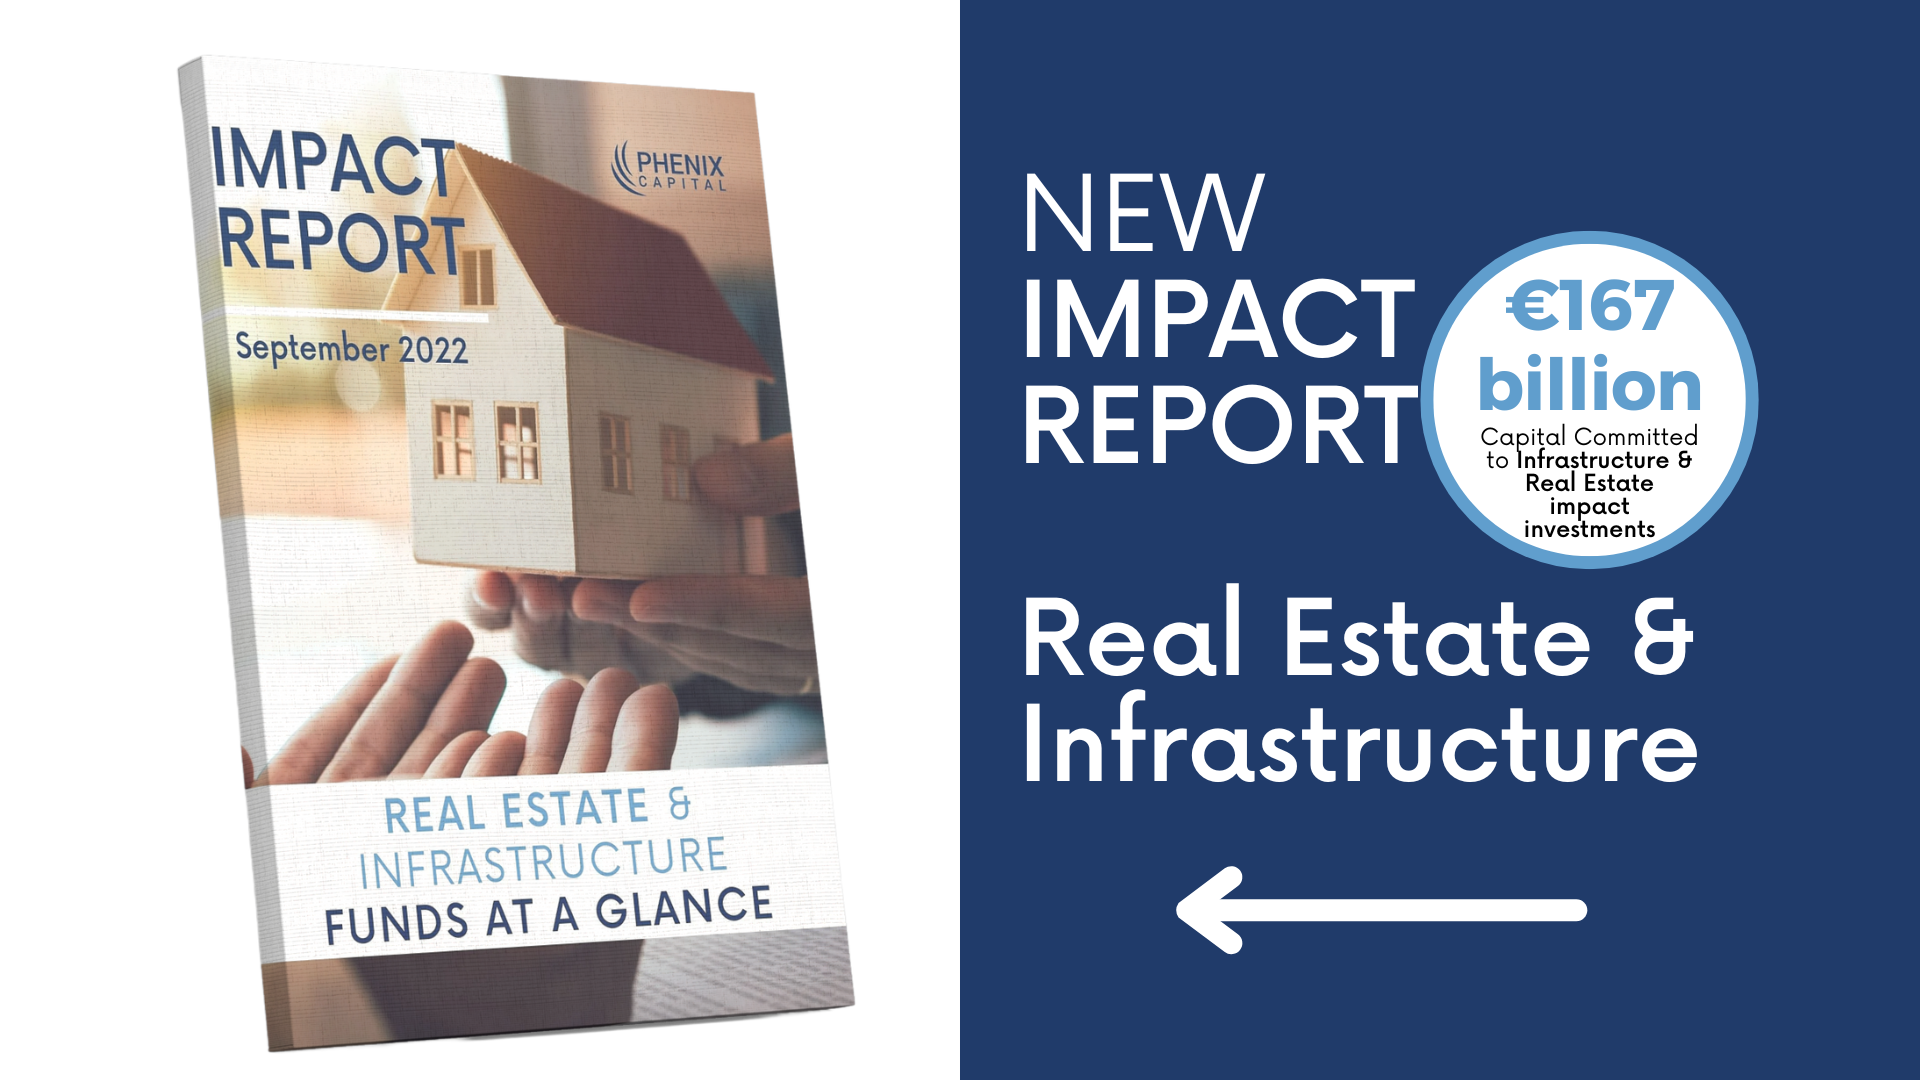 PRESS RELEASE: Impact funds targeting Infrastructure have increased